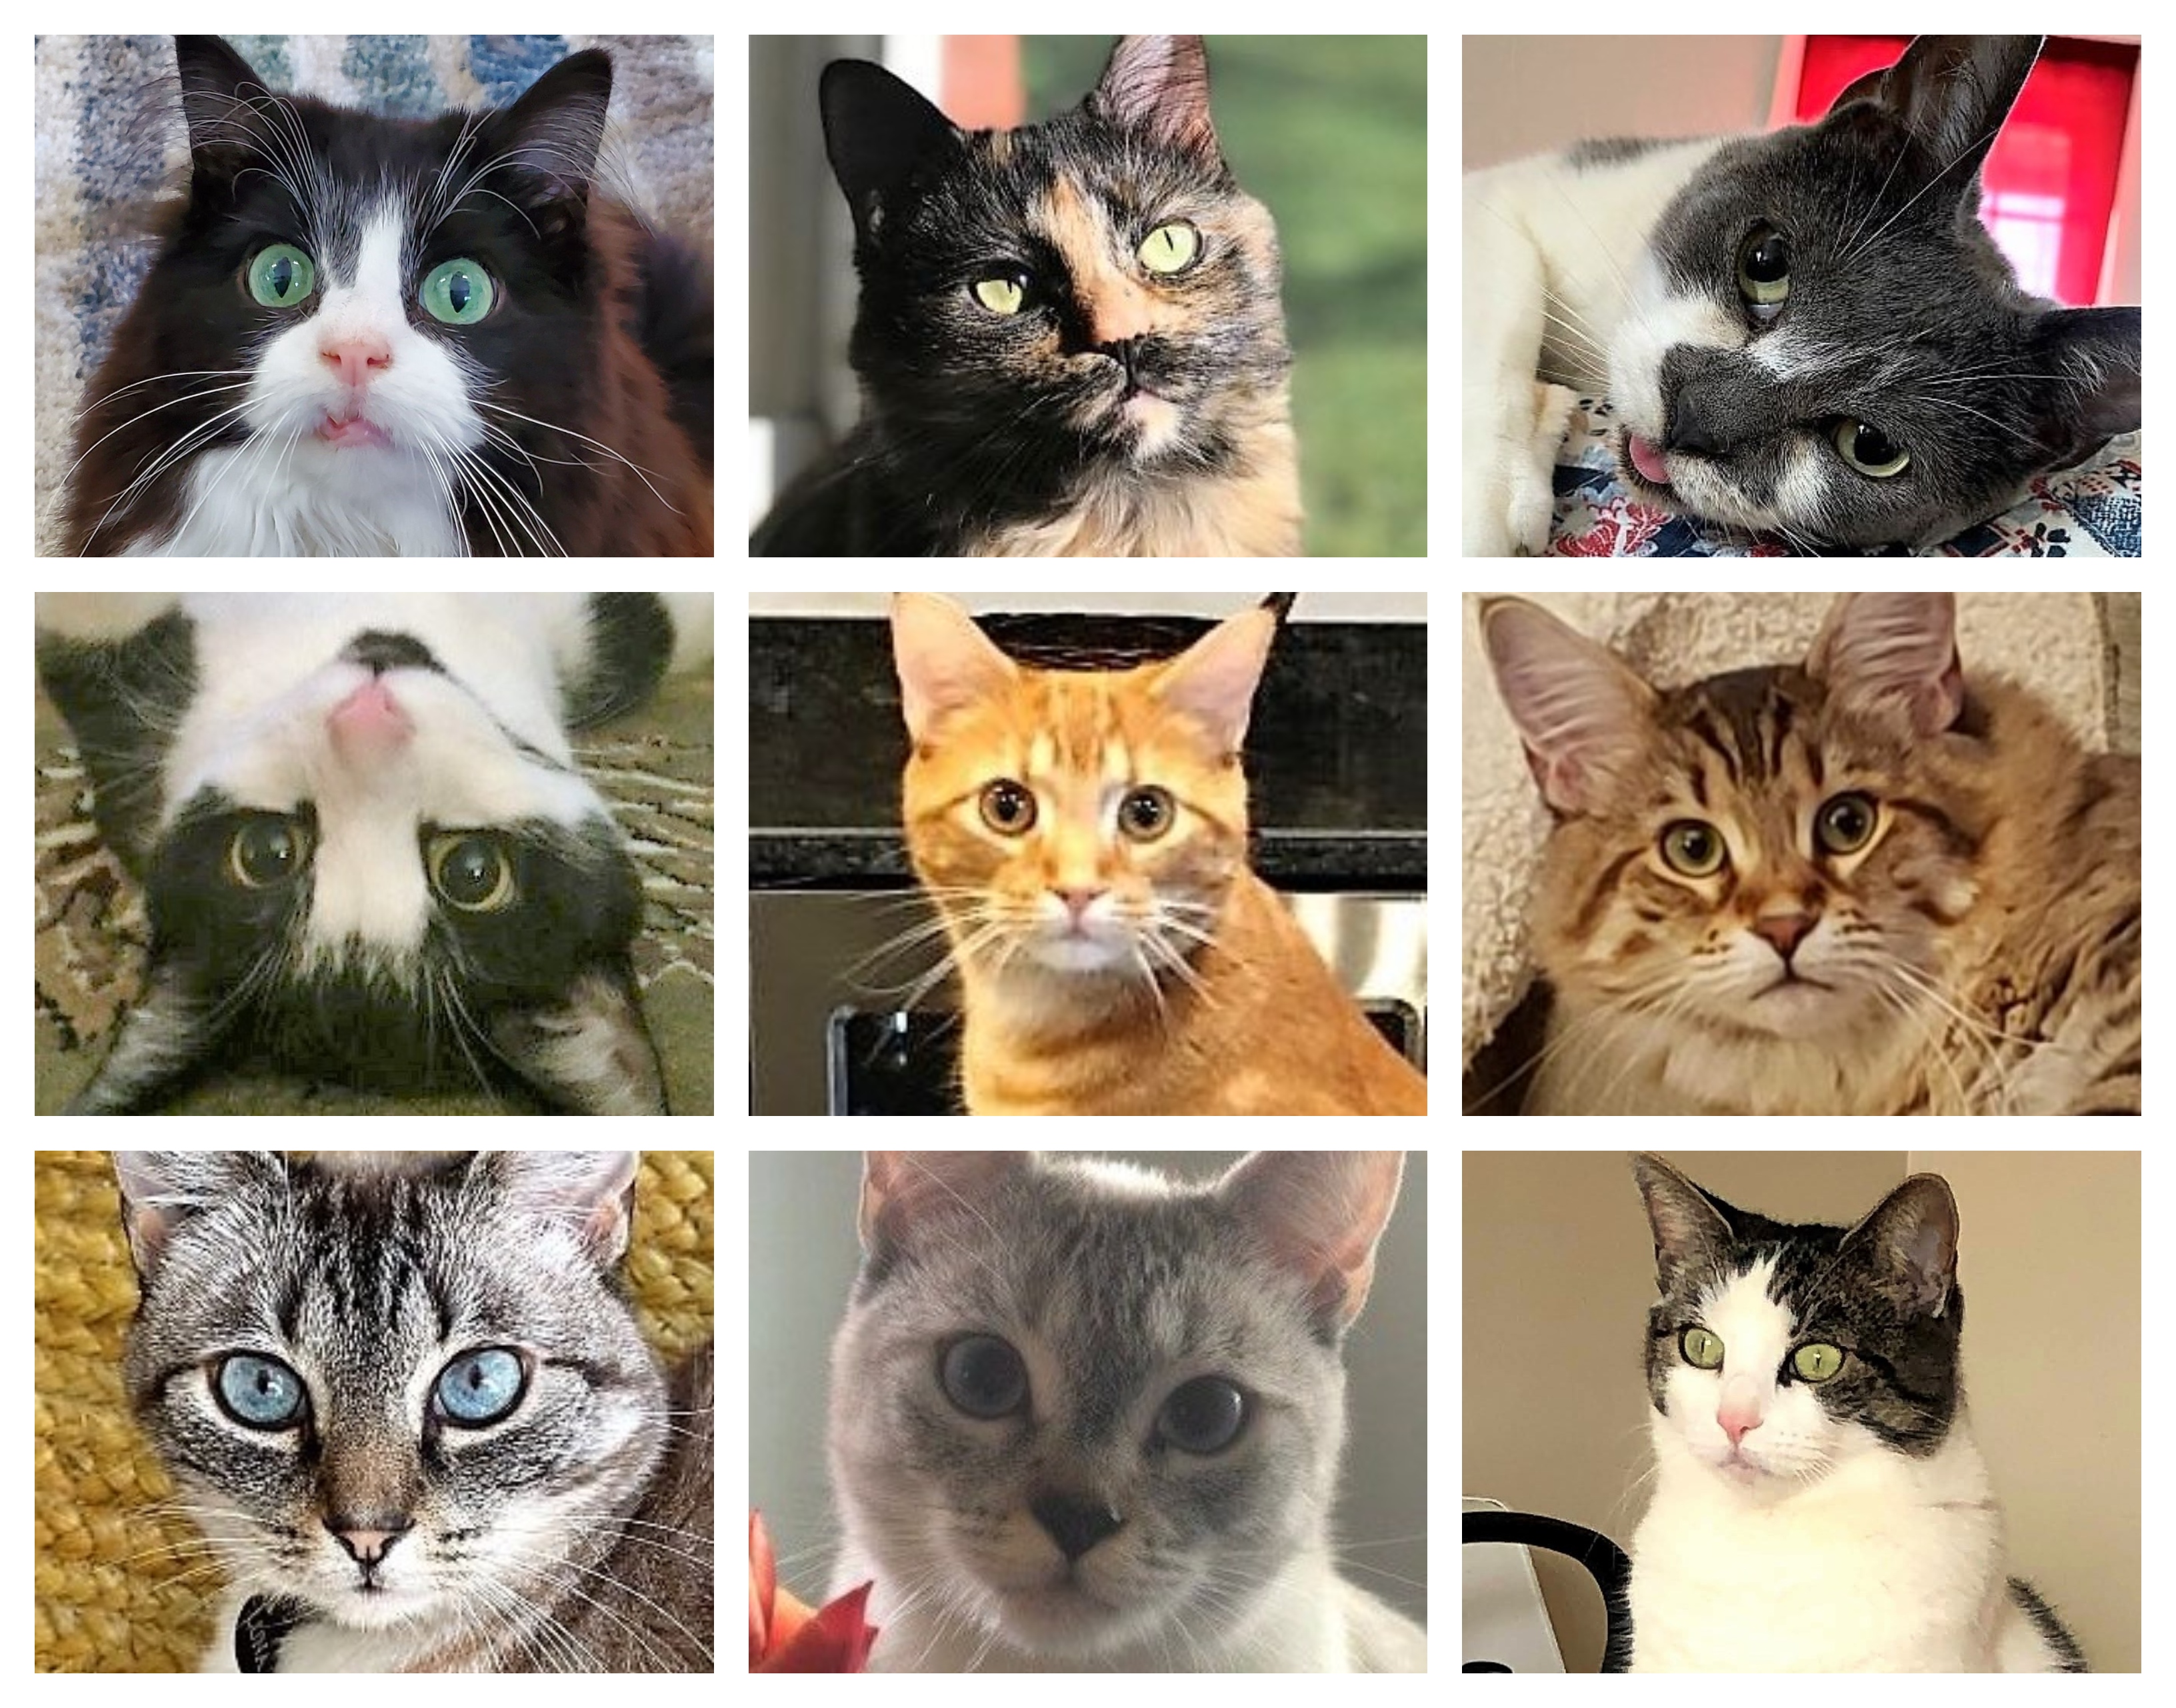 Top 10 Cutest Cat Pictures of All Time + Honorable Mentions